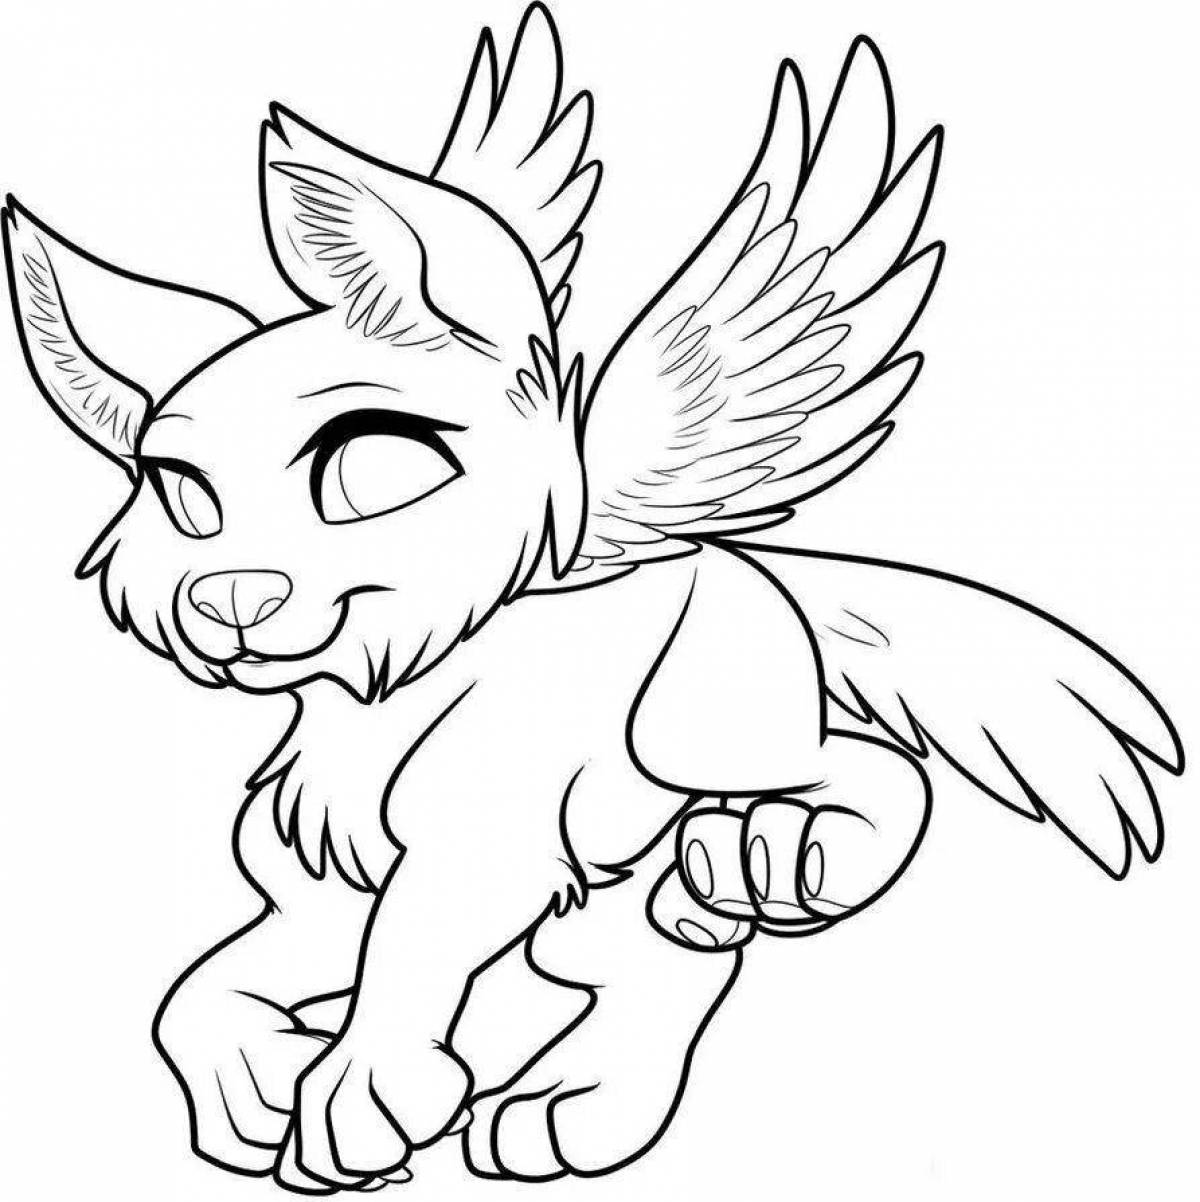 Dog with wings #11